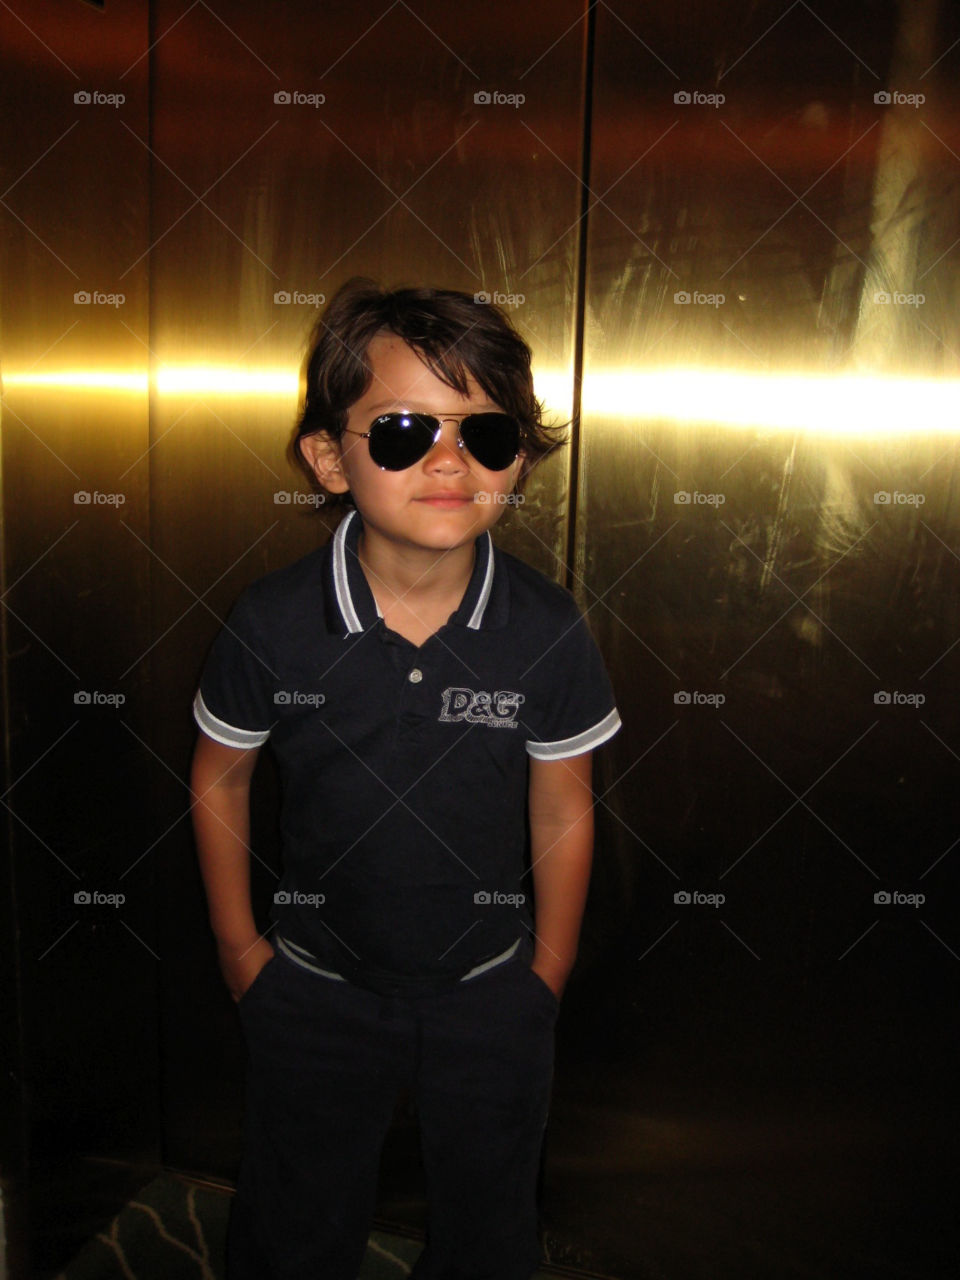 cool sunglasses boy bad by alleballe